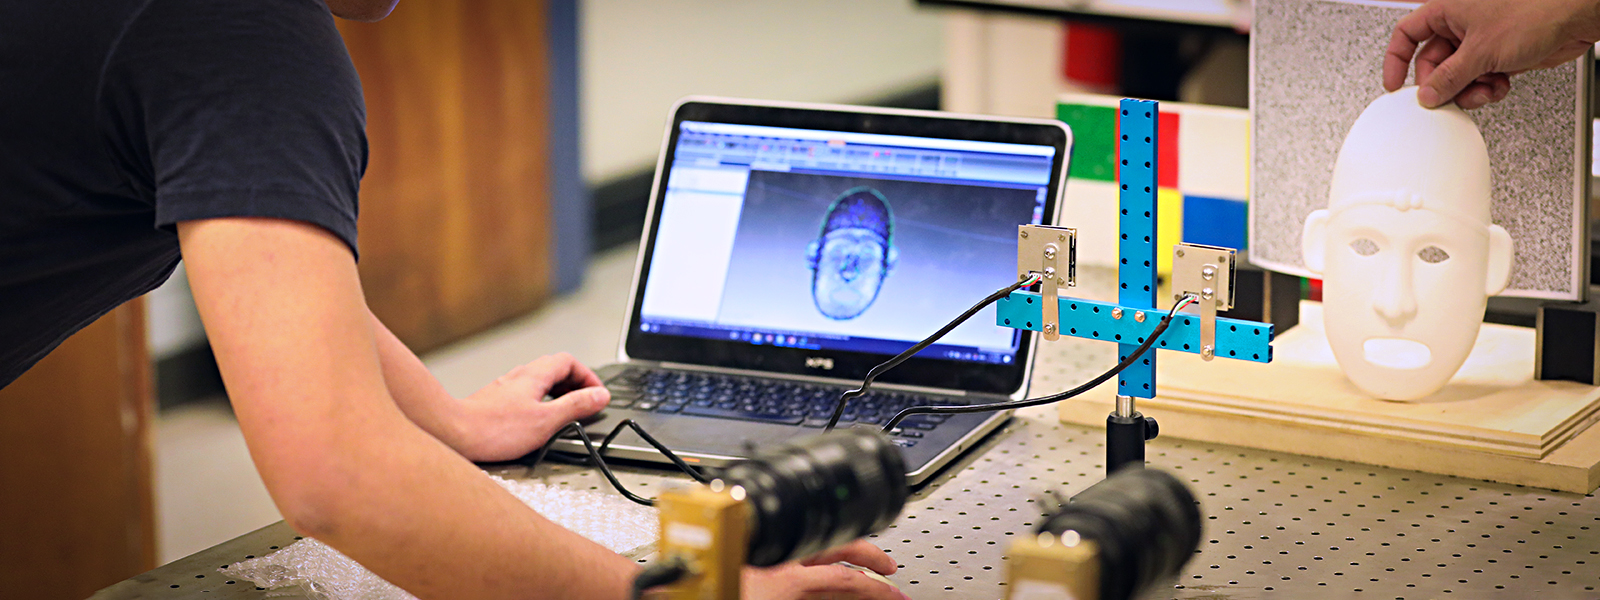 graduate students work on facial recognition